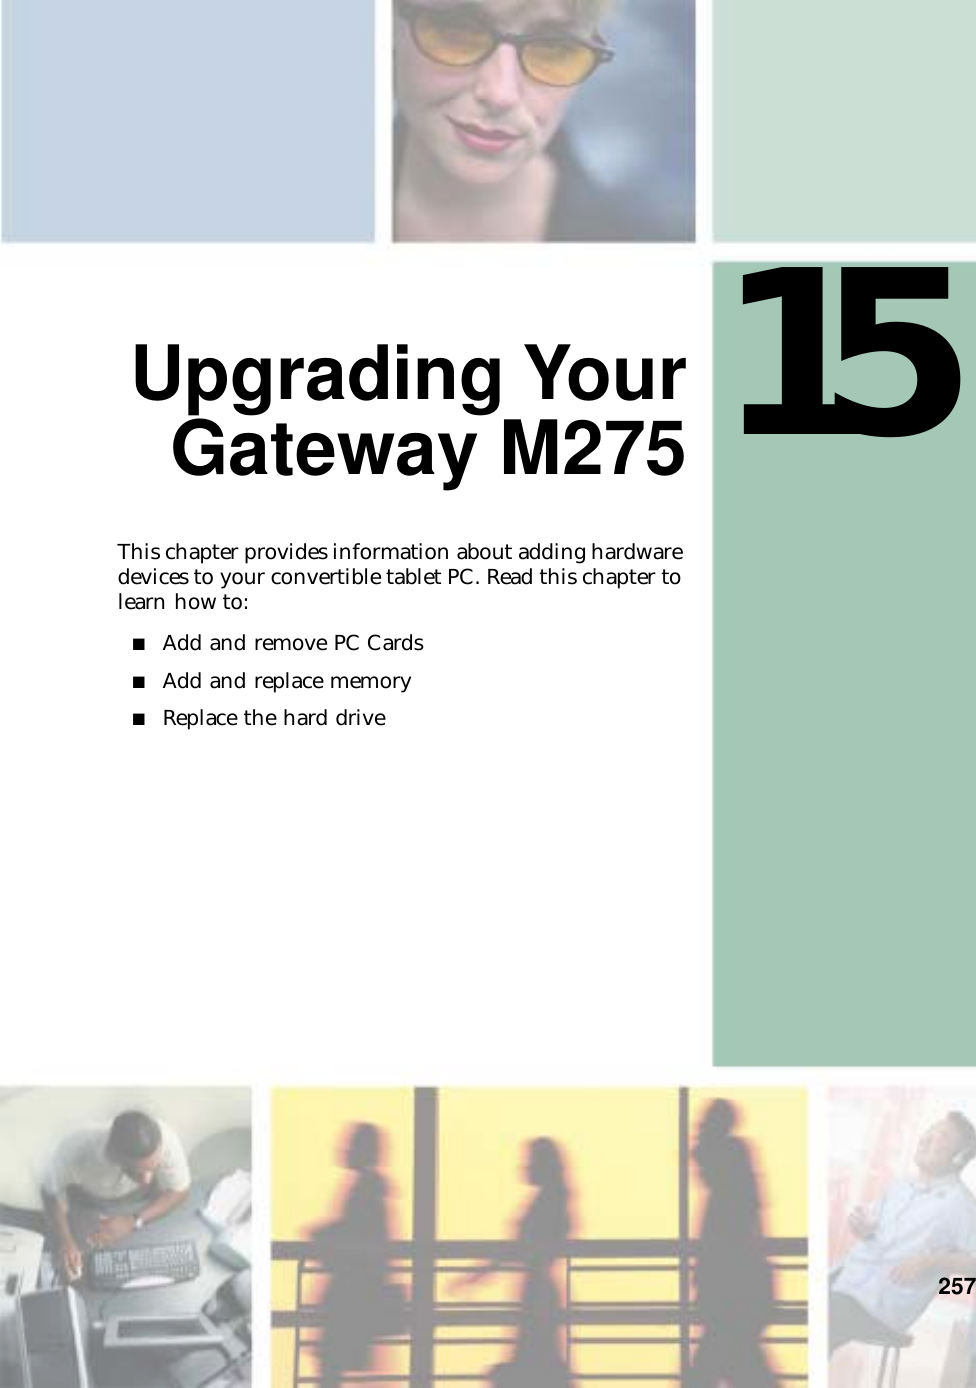 15257Upgrading YourGateway M275This chapter provides information about adding hardware devices to your convertible tablet PC. Read this chapter to learn how to:■Add and remove PC Cards■Add and replace memory■Replace the hard drive